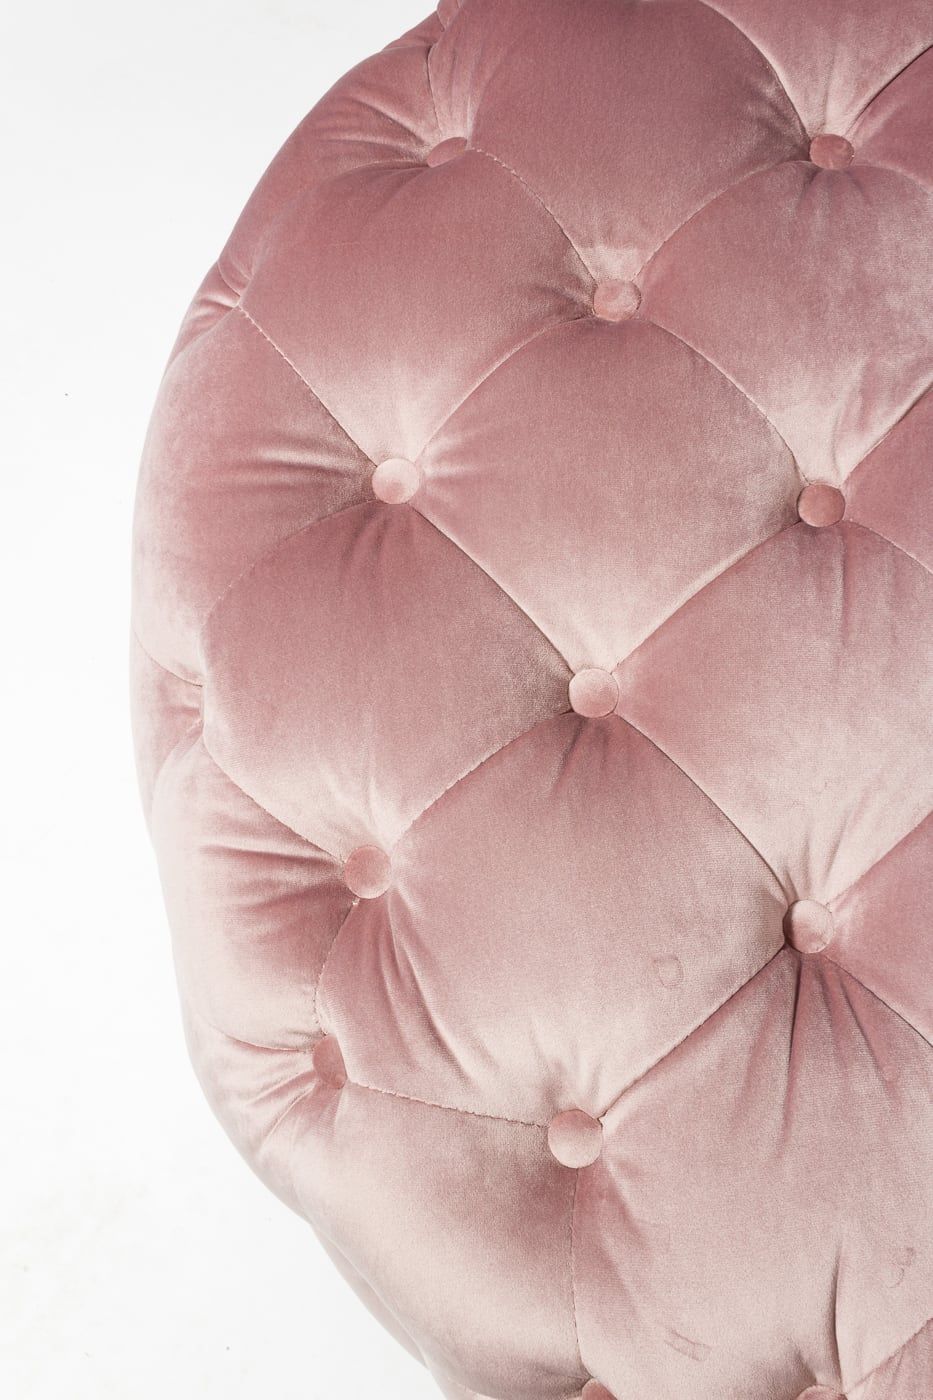 Co077 Bretta Tufted Pink Velvet Ottoman Prop Rental | Acme Brooklyn Within Dark Red And Cream Woven Pouf Ottomans (View 17 of 20)